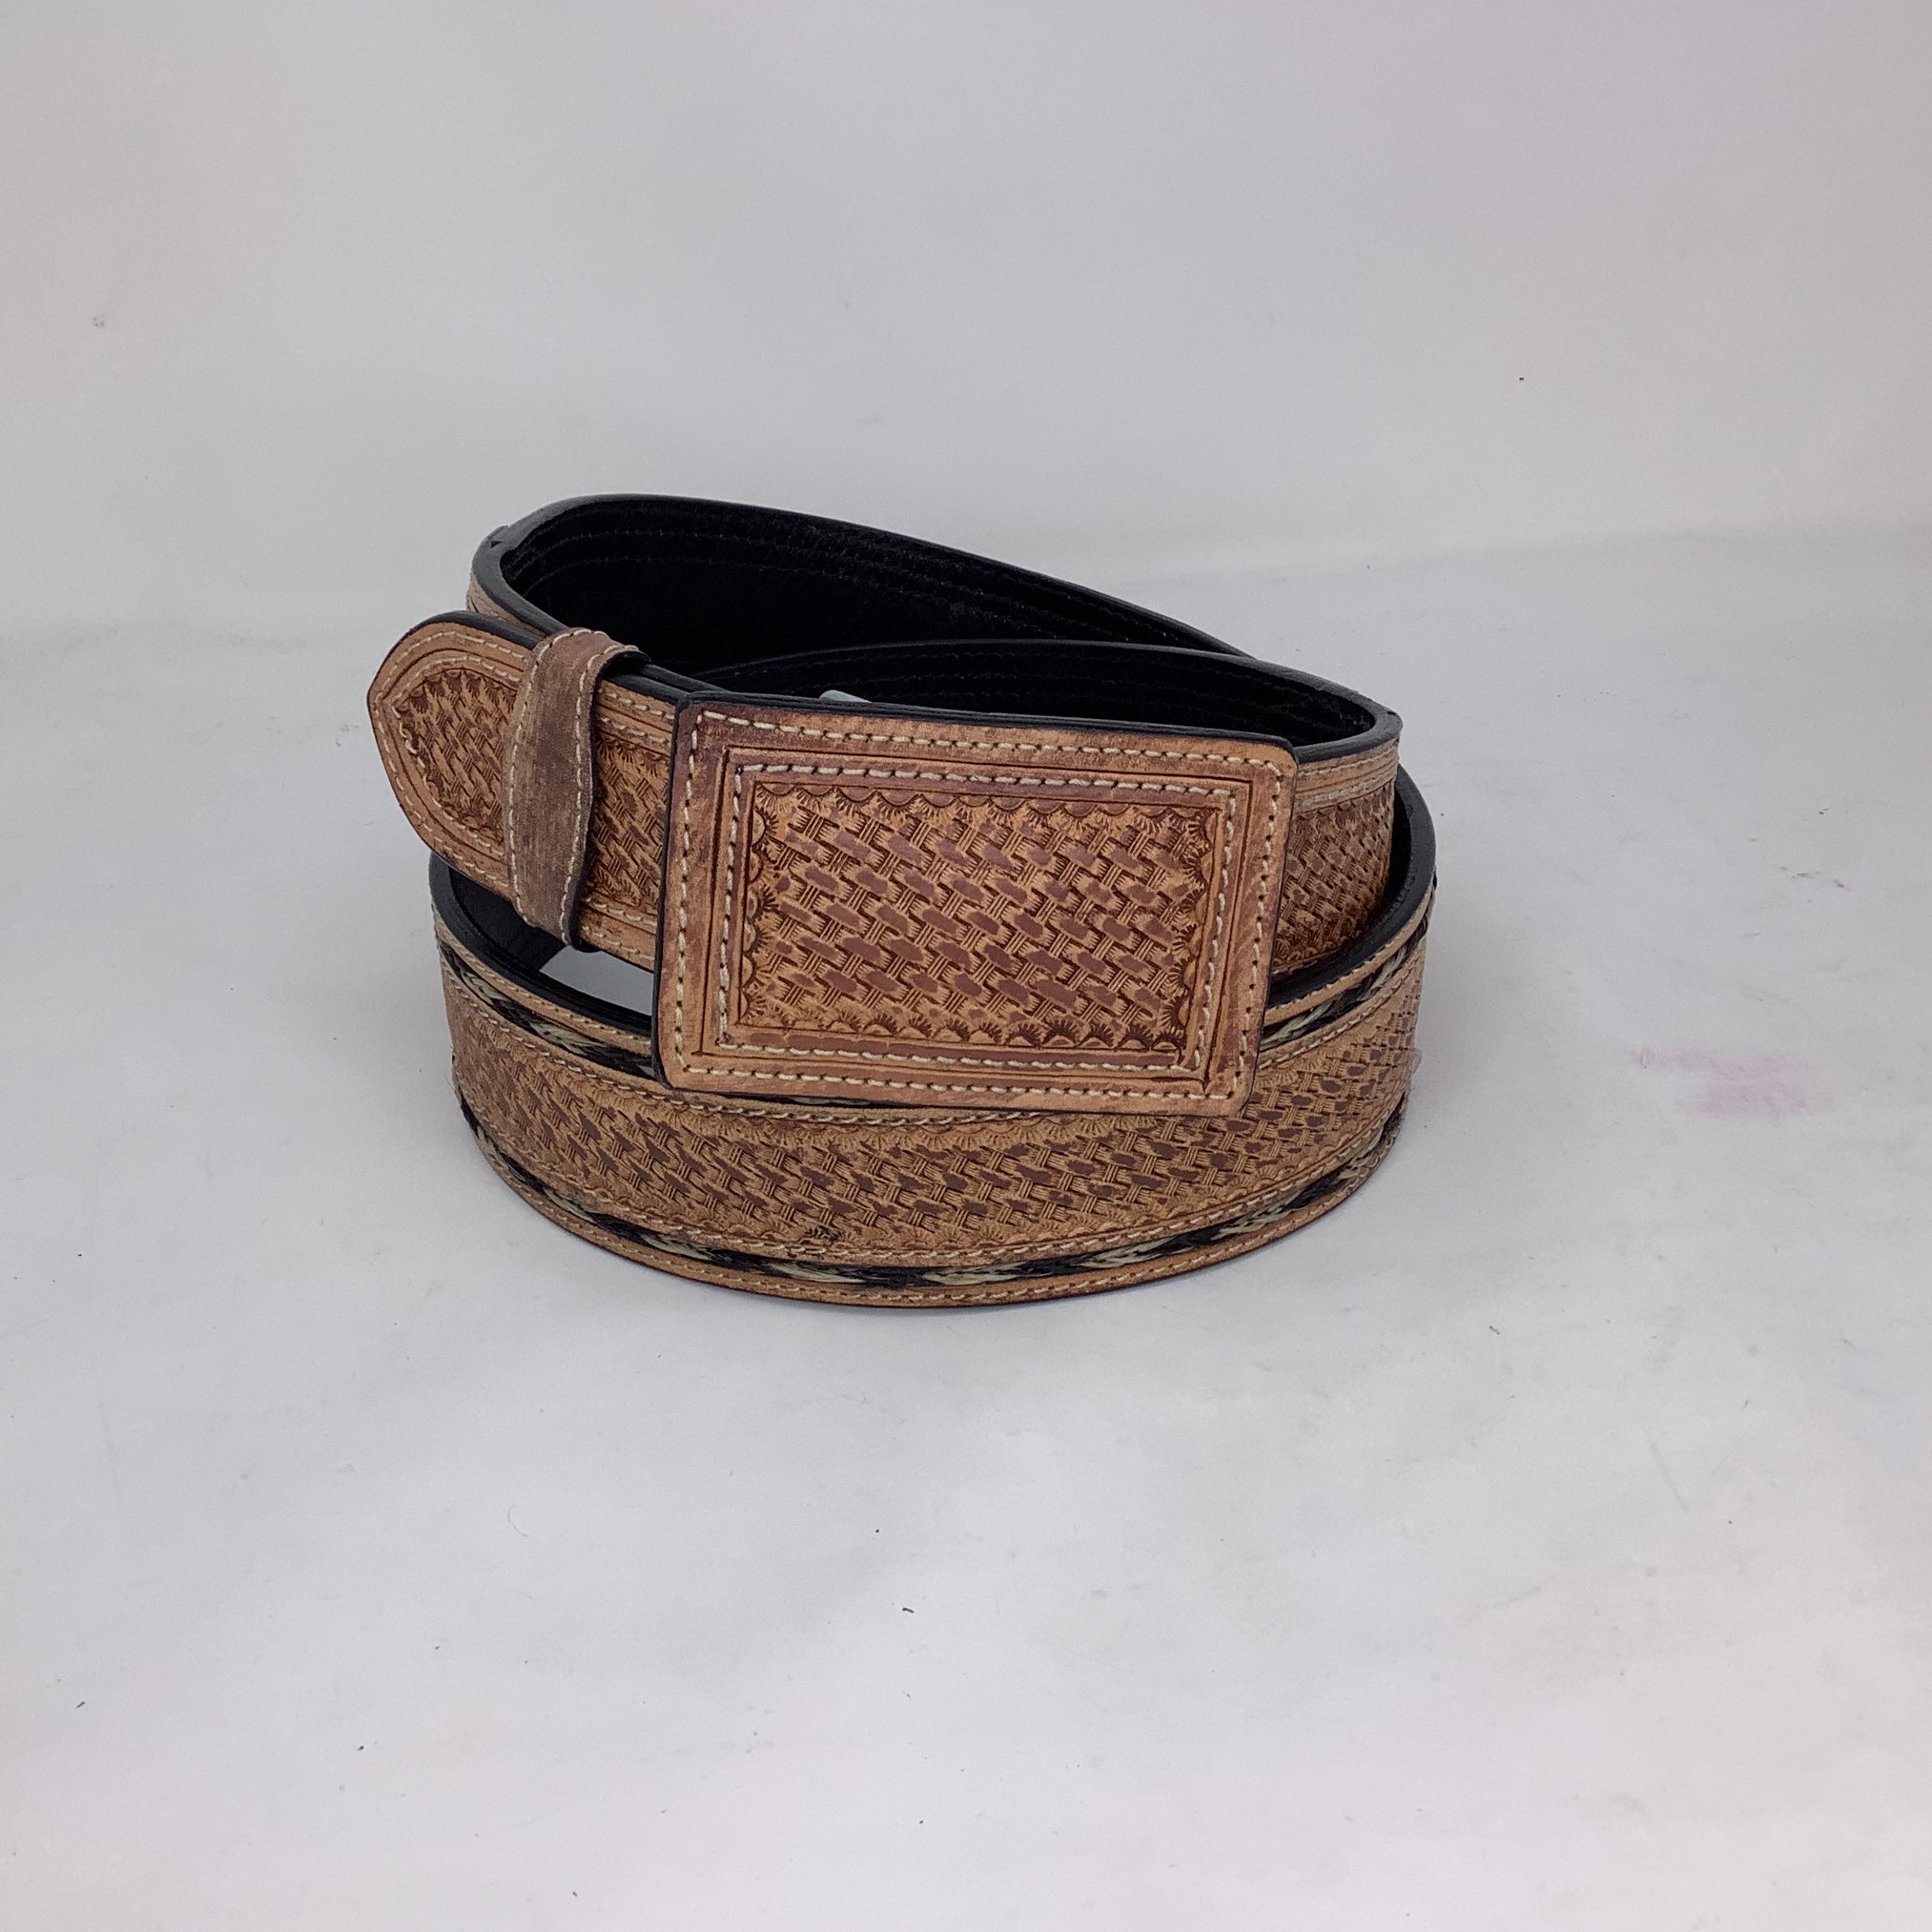 "Pablo" Leather Horsehair Braided Belt